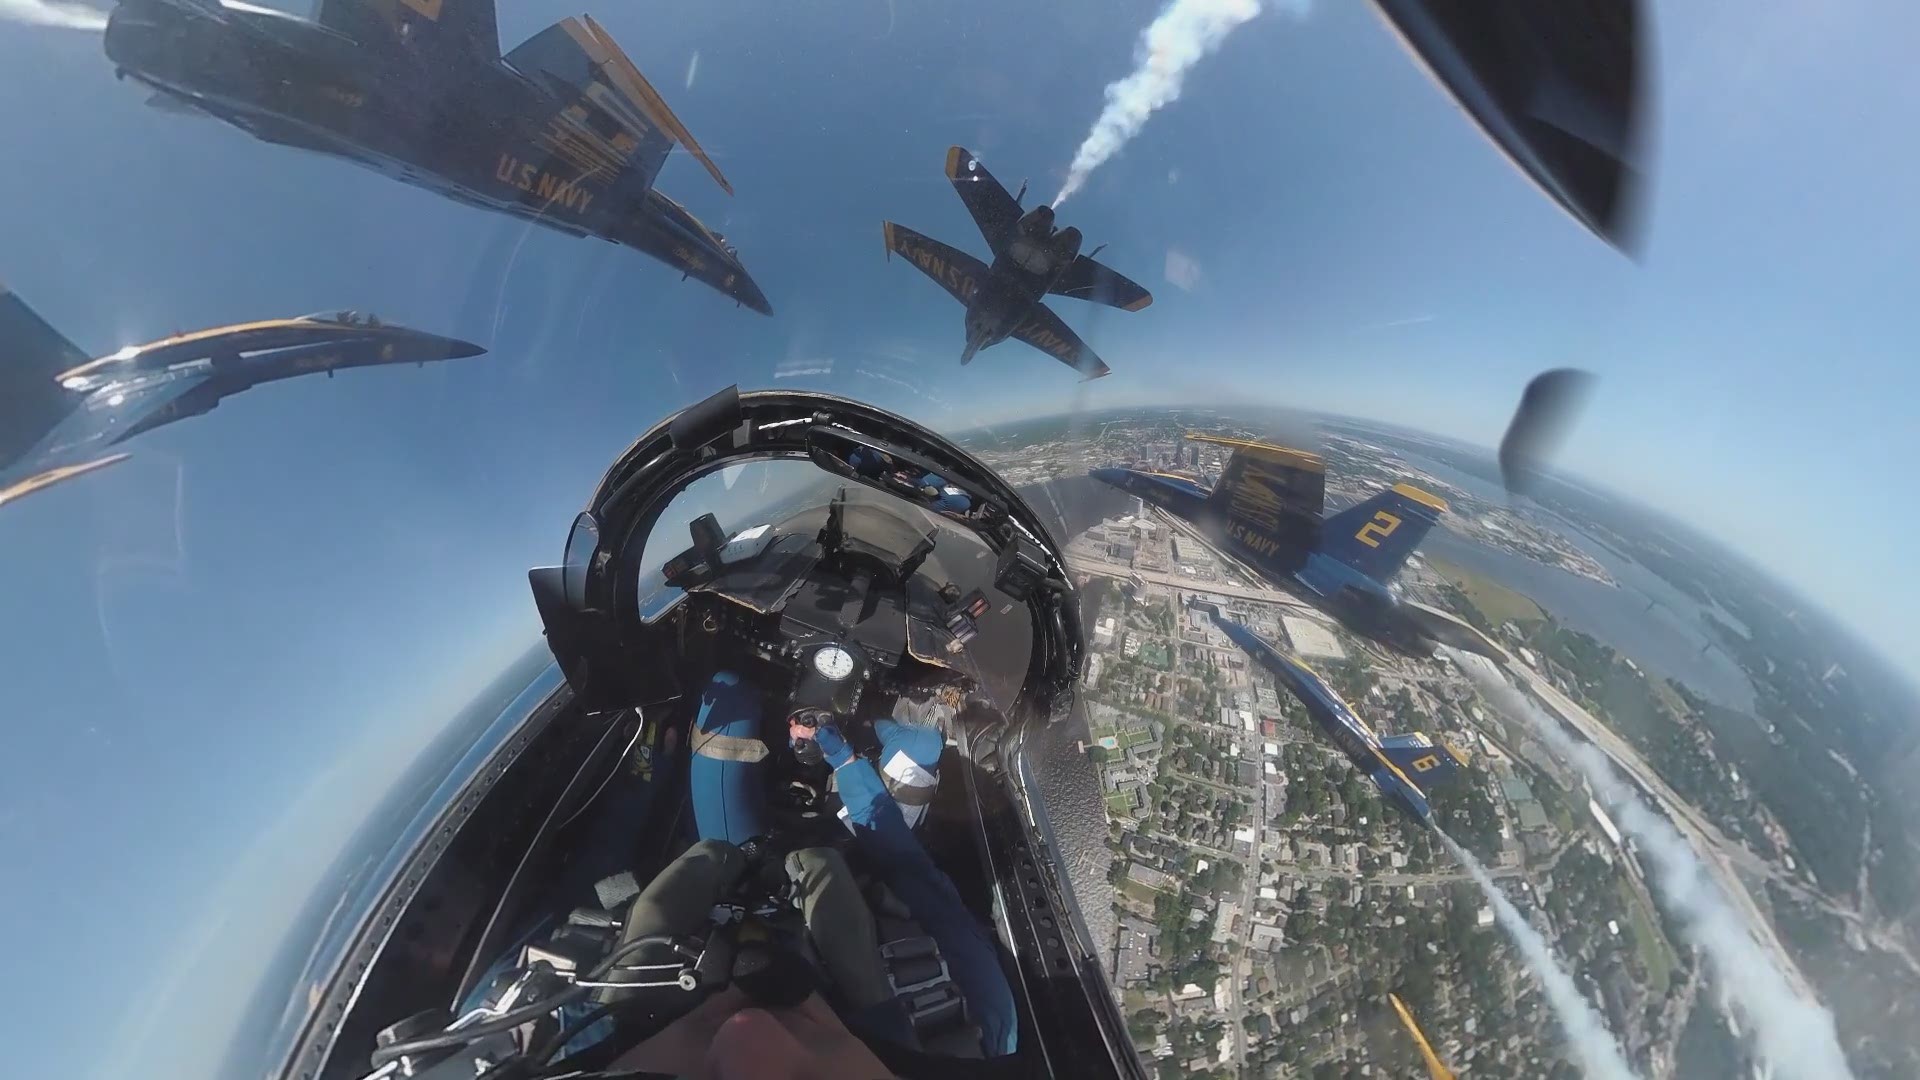 Many shared their videos of the Blue Angels Jacksonville flyover with First Coast News. But no one had such a stunning vantage point as the pilots themselves.